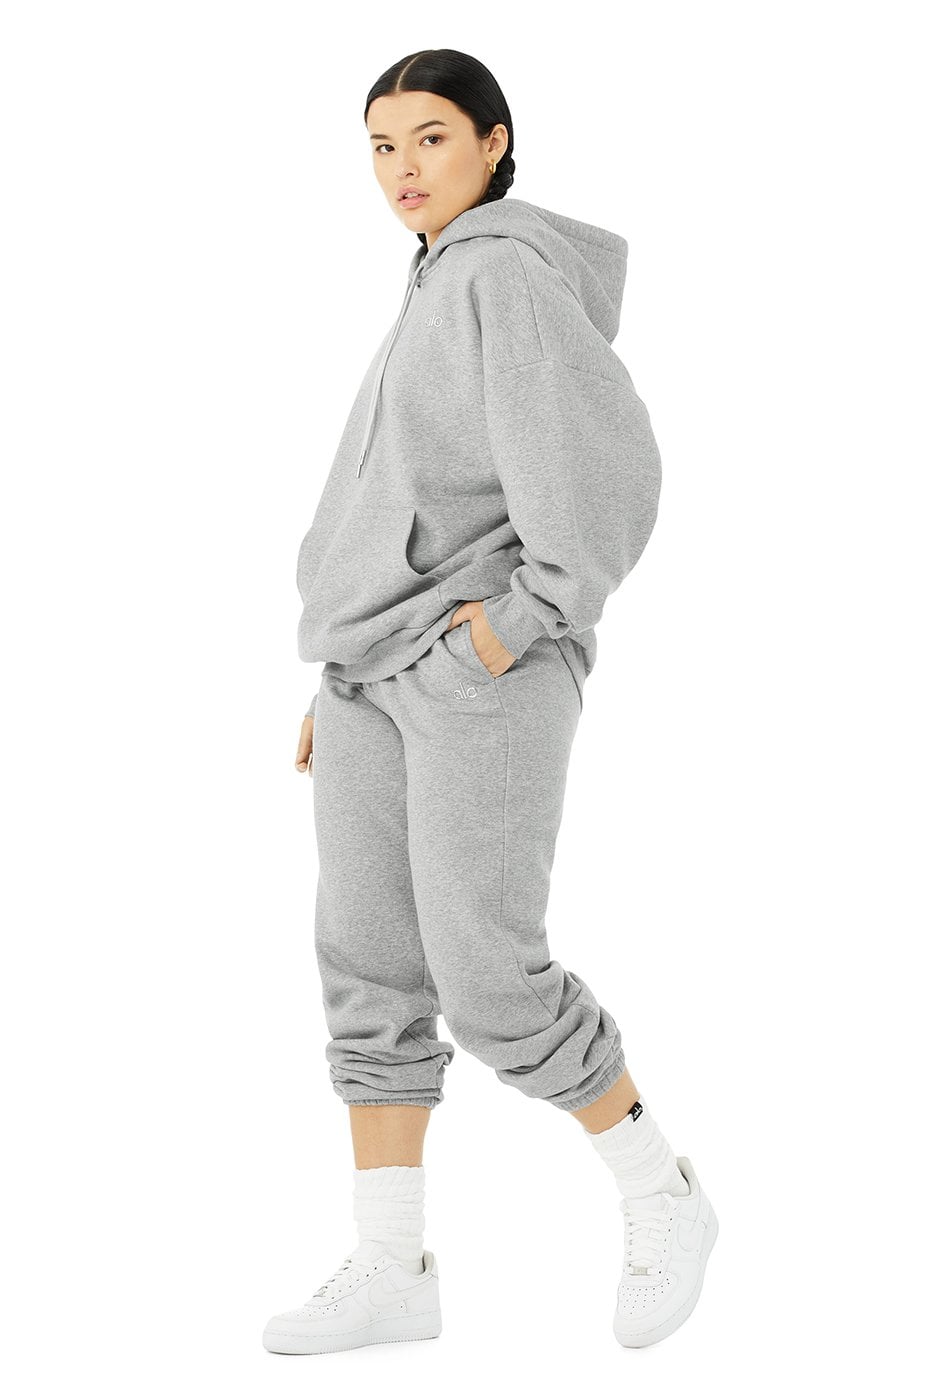 Alo Accolade Hoodie & Accolade Sweatpant Set, Alo Has a Bunch of Cute Sets  You Can Both Work Out and Lounge In